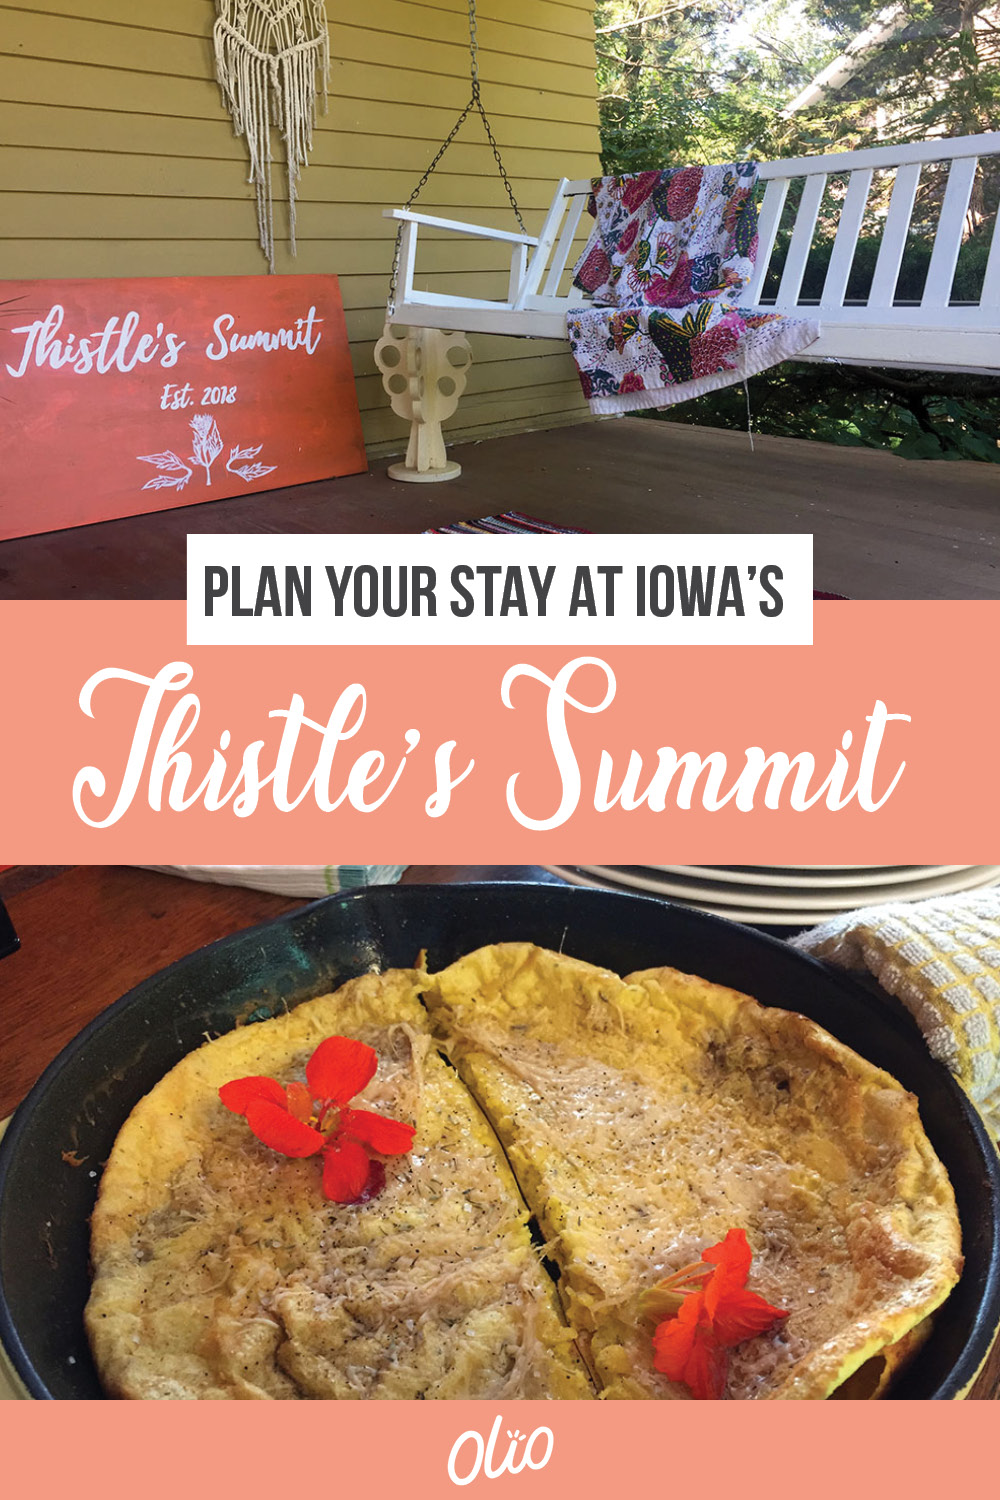 Discover the perfect location for your next Midwestern weekend getaway at Thistle's Summit in Mount Vernon, Iowa! Located steps from the Cornell College campus, Thistle's Summit is a queer bed and breakfast focused on community, creativity and inclusivity. Enjoy phenomenal food, tap into the community's artistic spirit, and, of course, meet Thistle the dog. There's no better place to plan a weekend getaway than Mount Vernon!